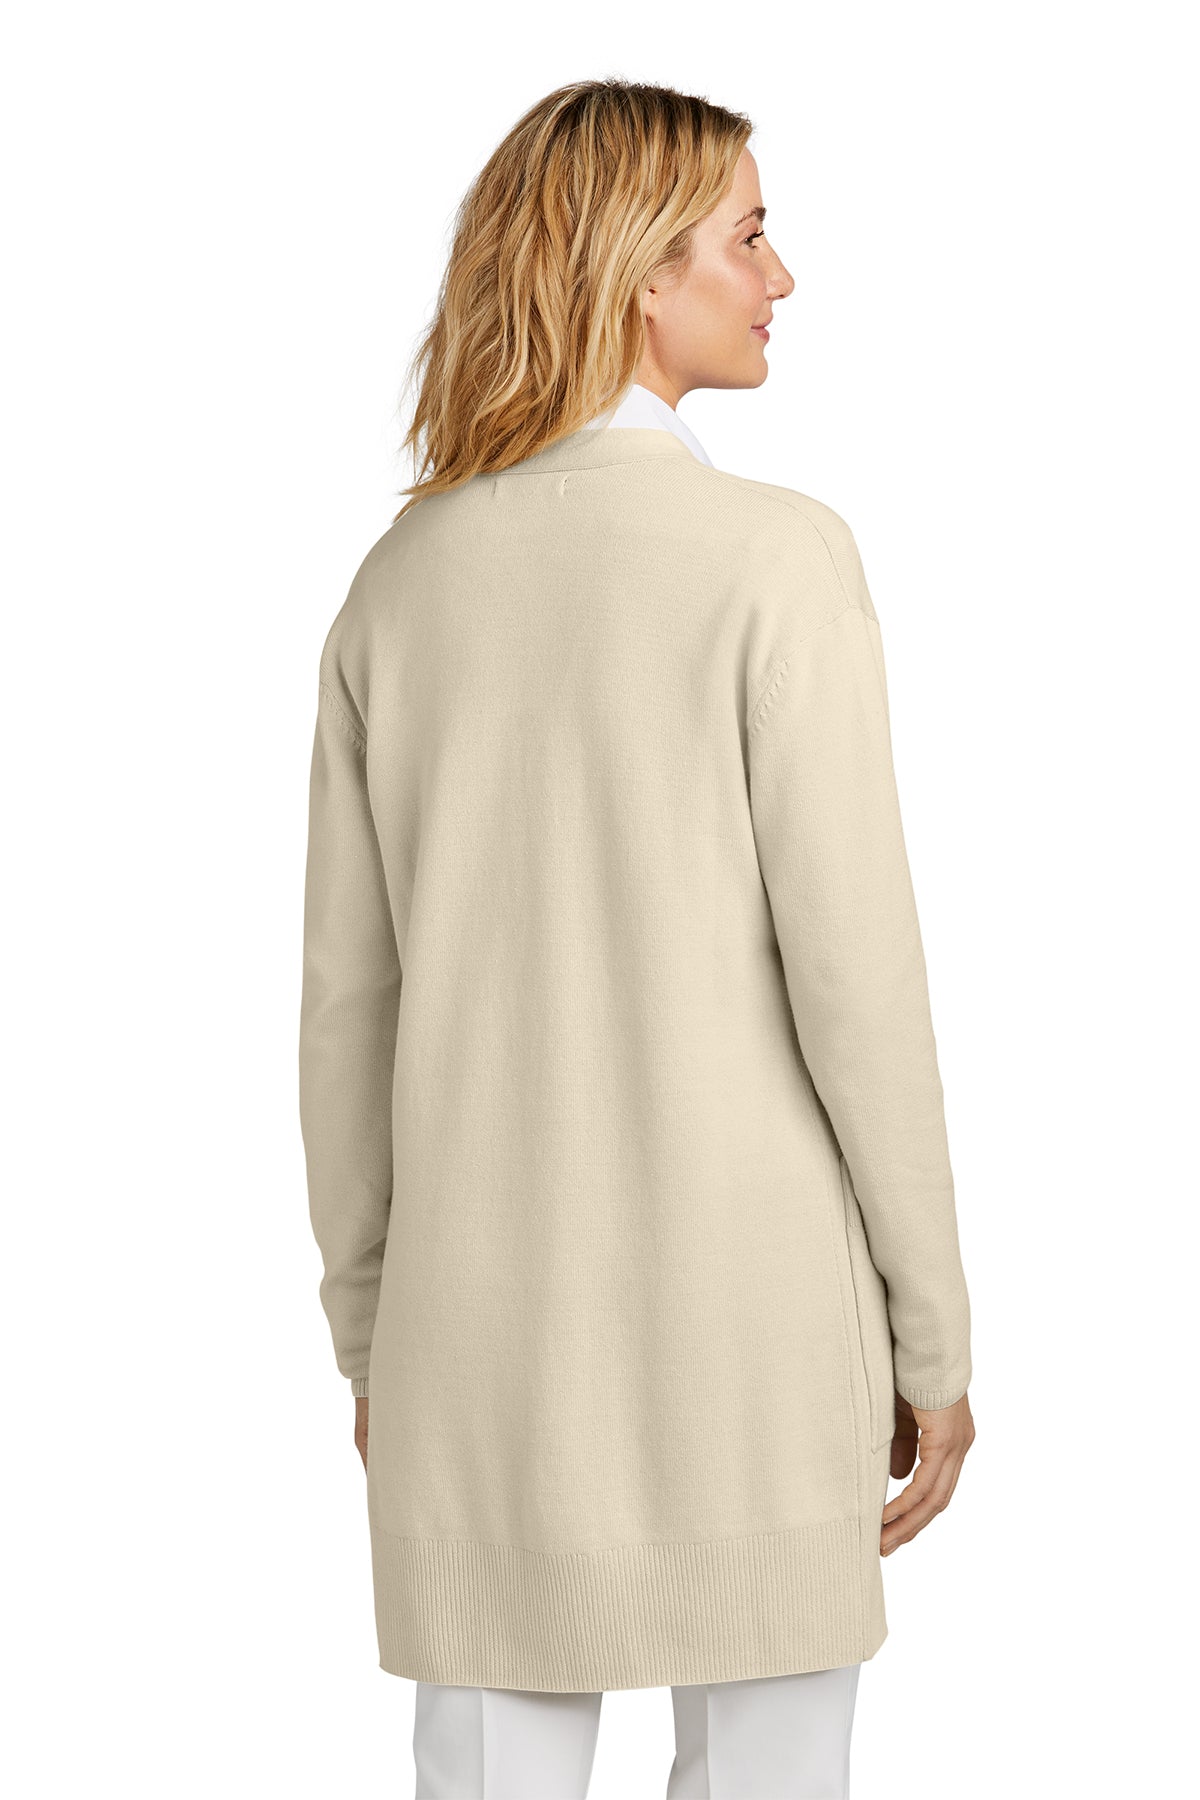 Lydia Open-Front Cardigan Sweater - Birch